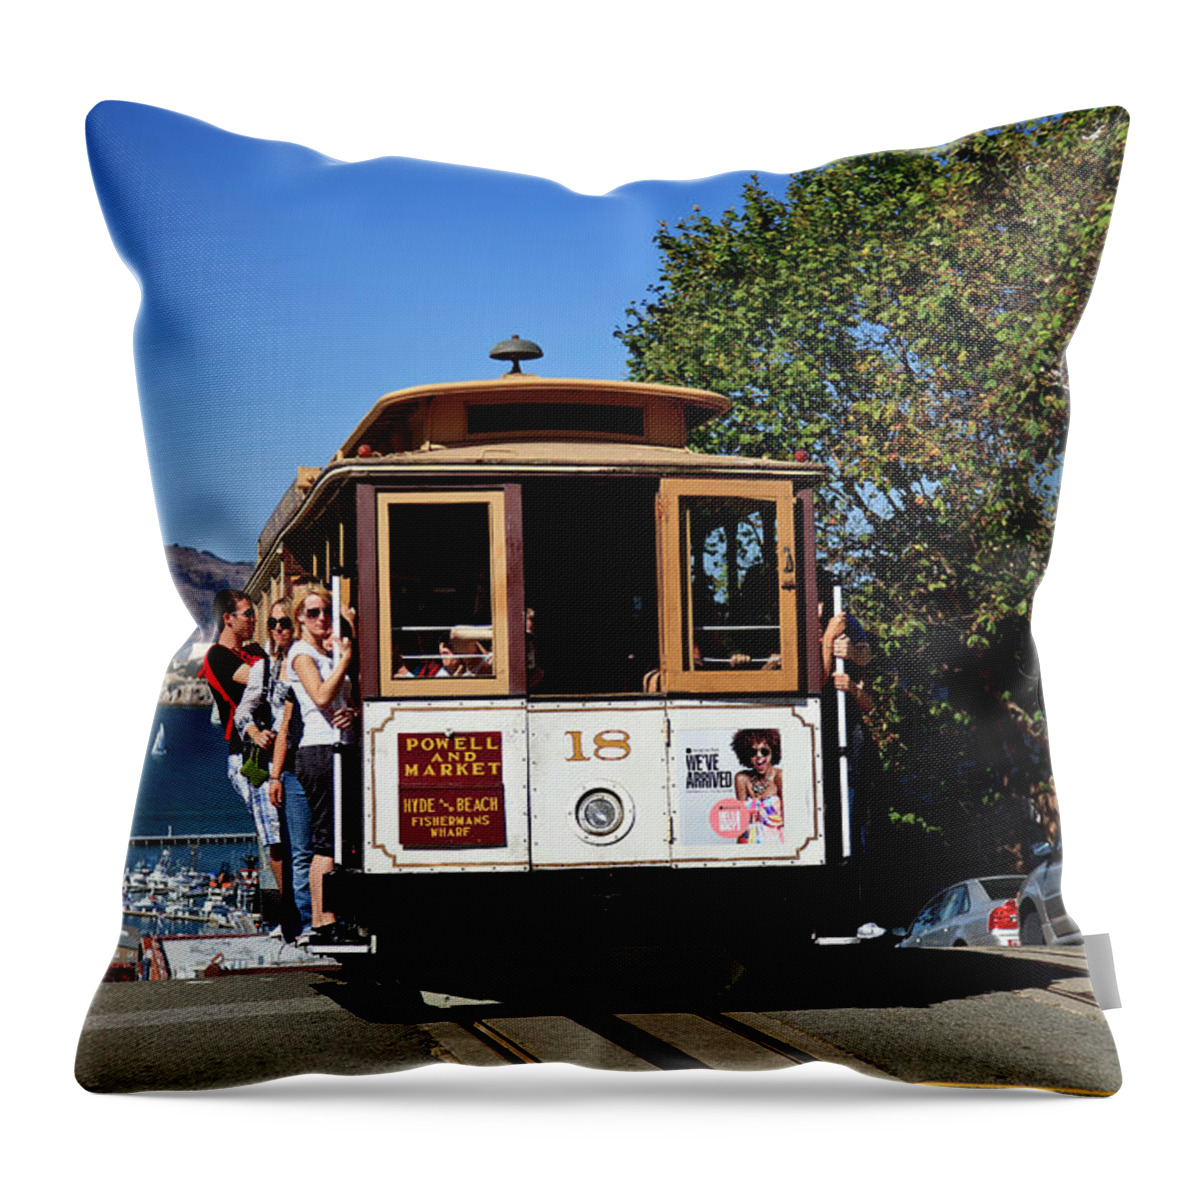 Estock Throw Pillow featuring the digital art Cable Car In San Francisco by Claudia Uripos